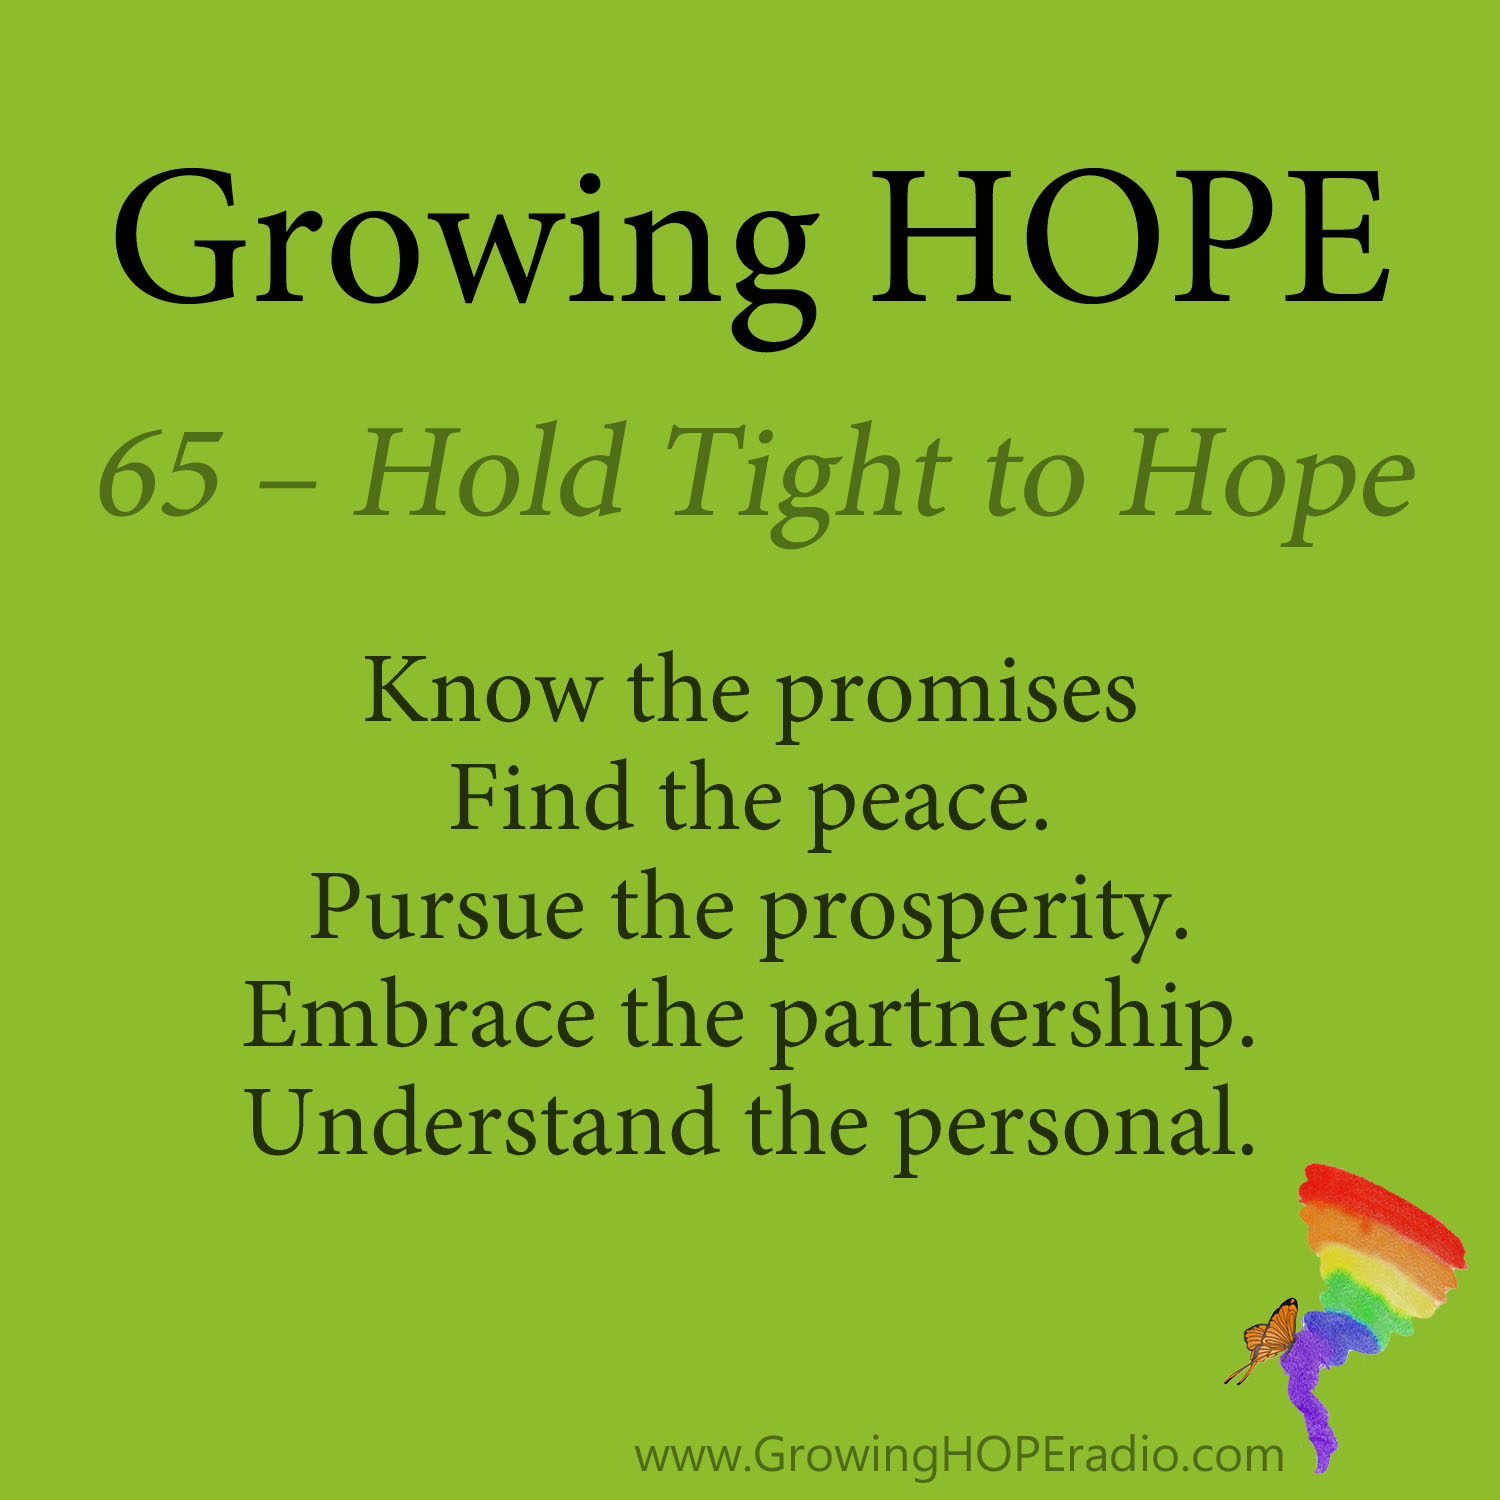 #GrowingHOPE daily - 5 points - hold tight to hope